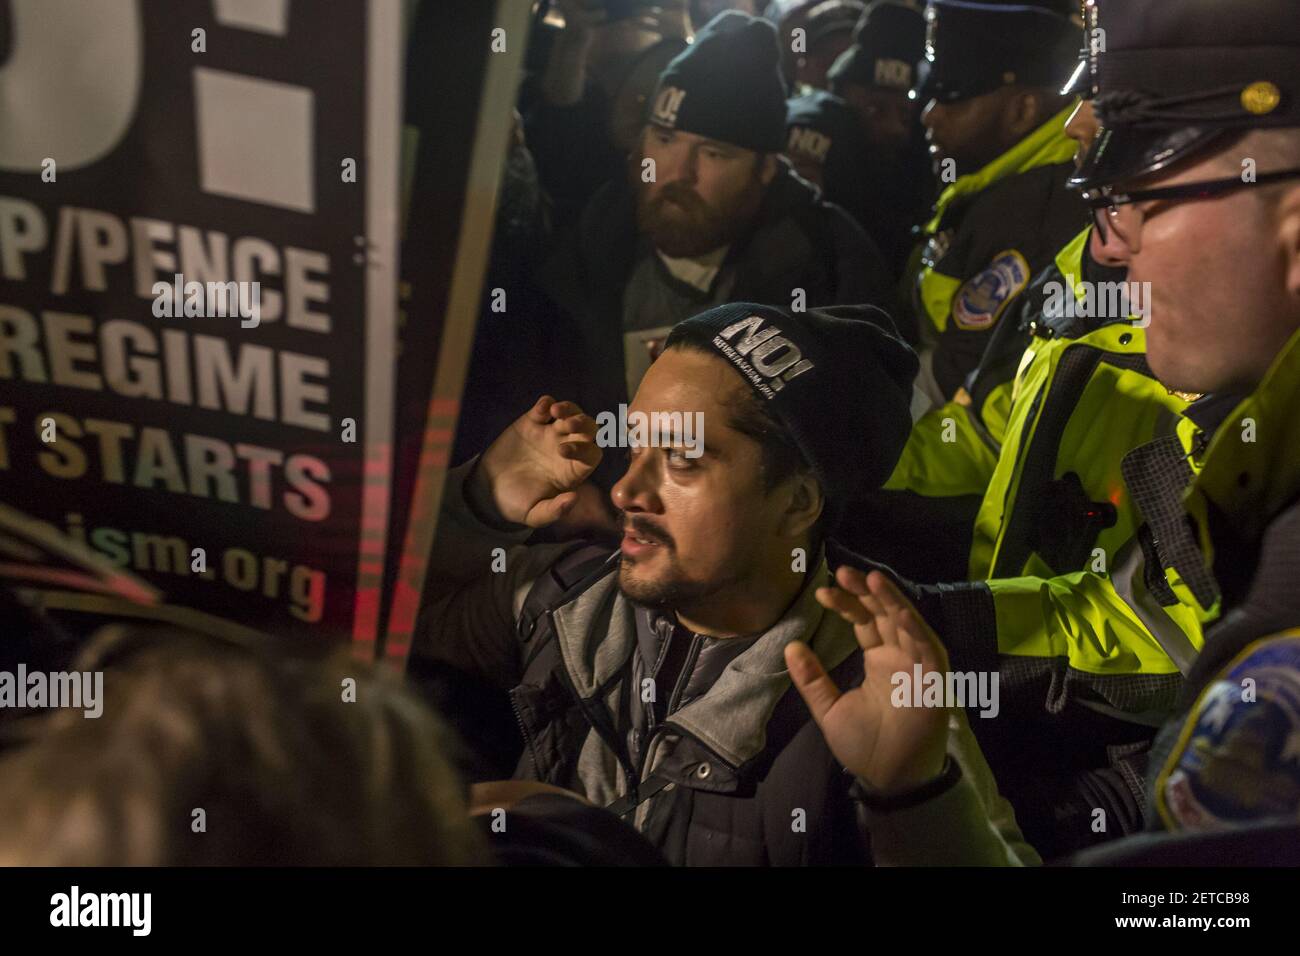 On the eve before Donald Trump is sworn in as the 45th President of the United States, in a pre-inauguration protest on January 19, 2017, hundreds of activists surrounded the Alt-Right 'Deploraball,' which was taking place inside the National Press Club in Washington D.C. (Photo by Michael Nigro) *** Please Use Credit from Credit Field *** Stock Photo